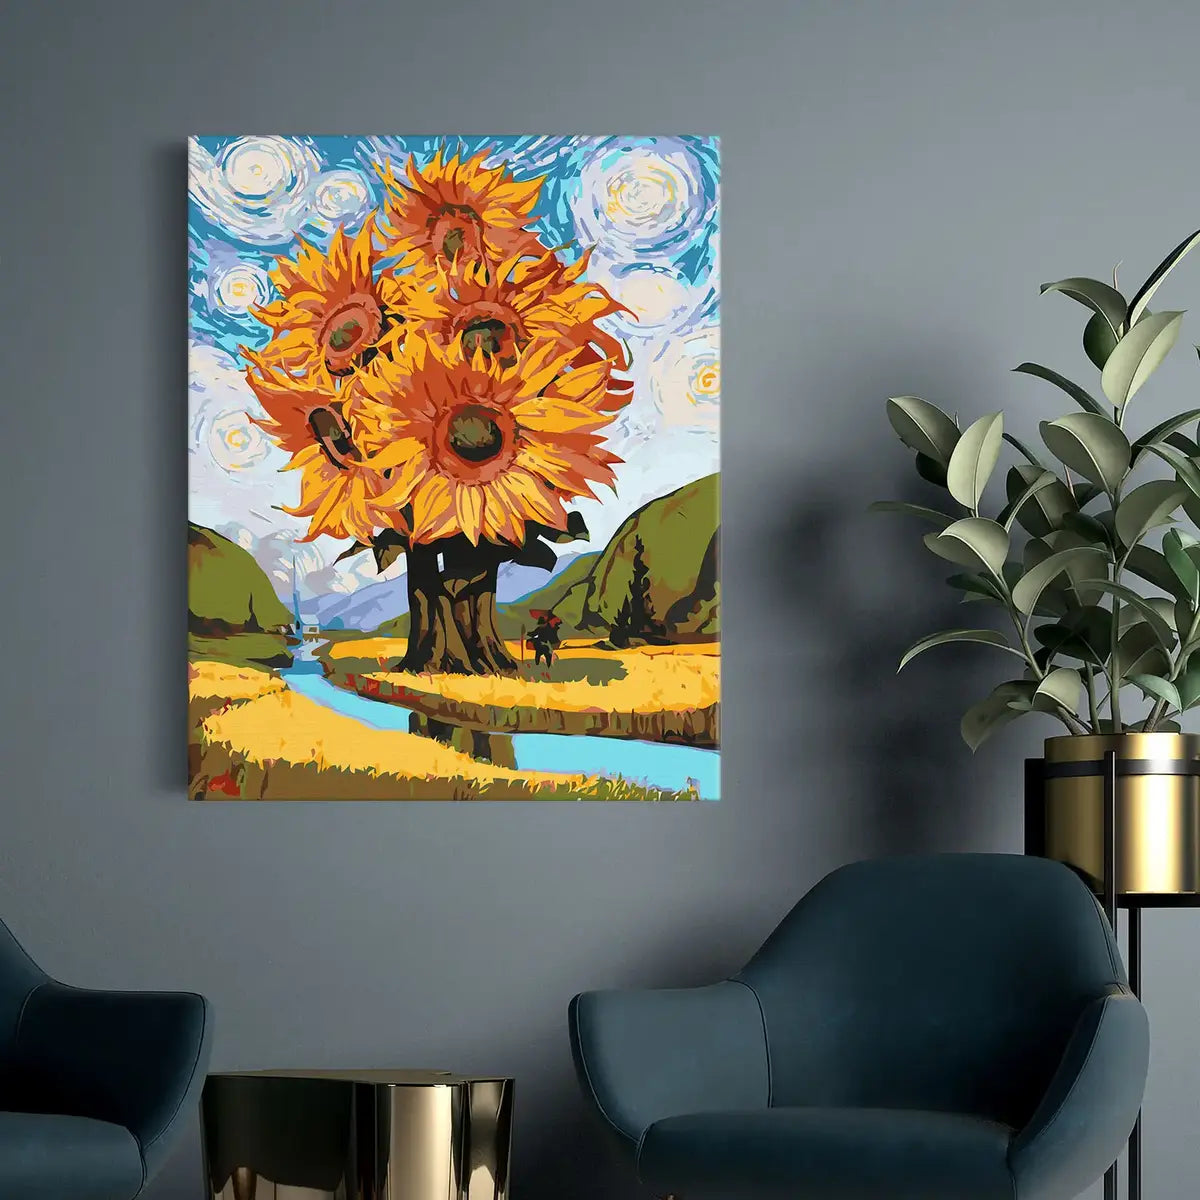 Sunflowers in a field in the style of Van Gogh